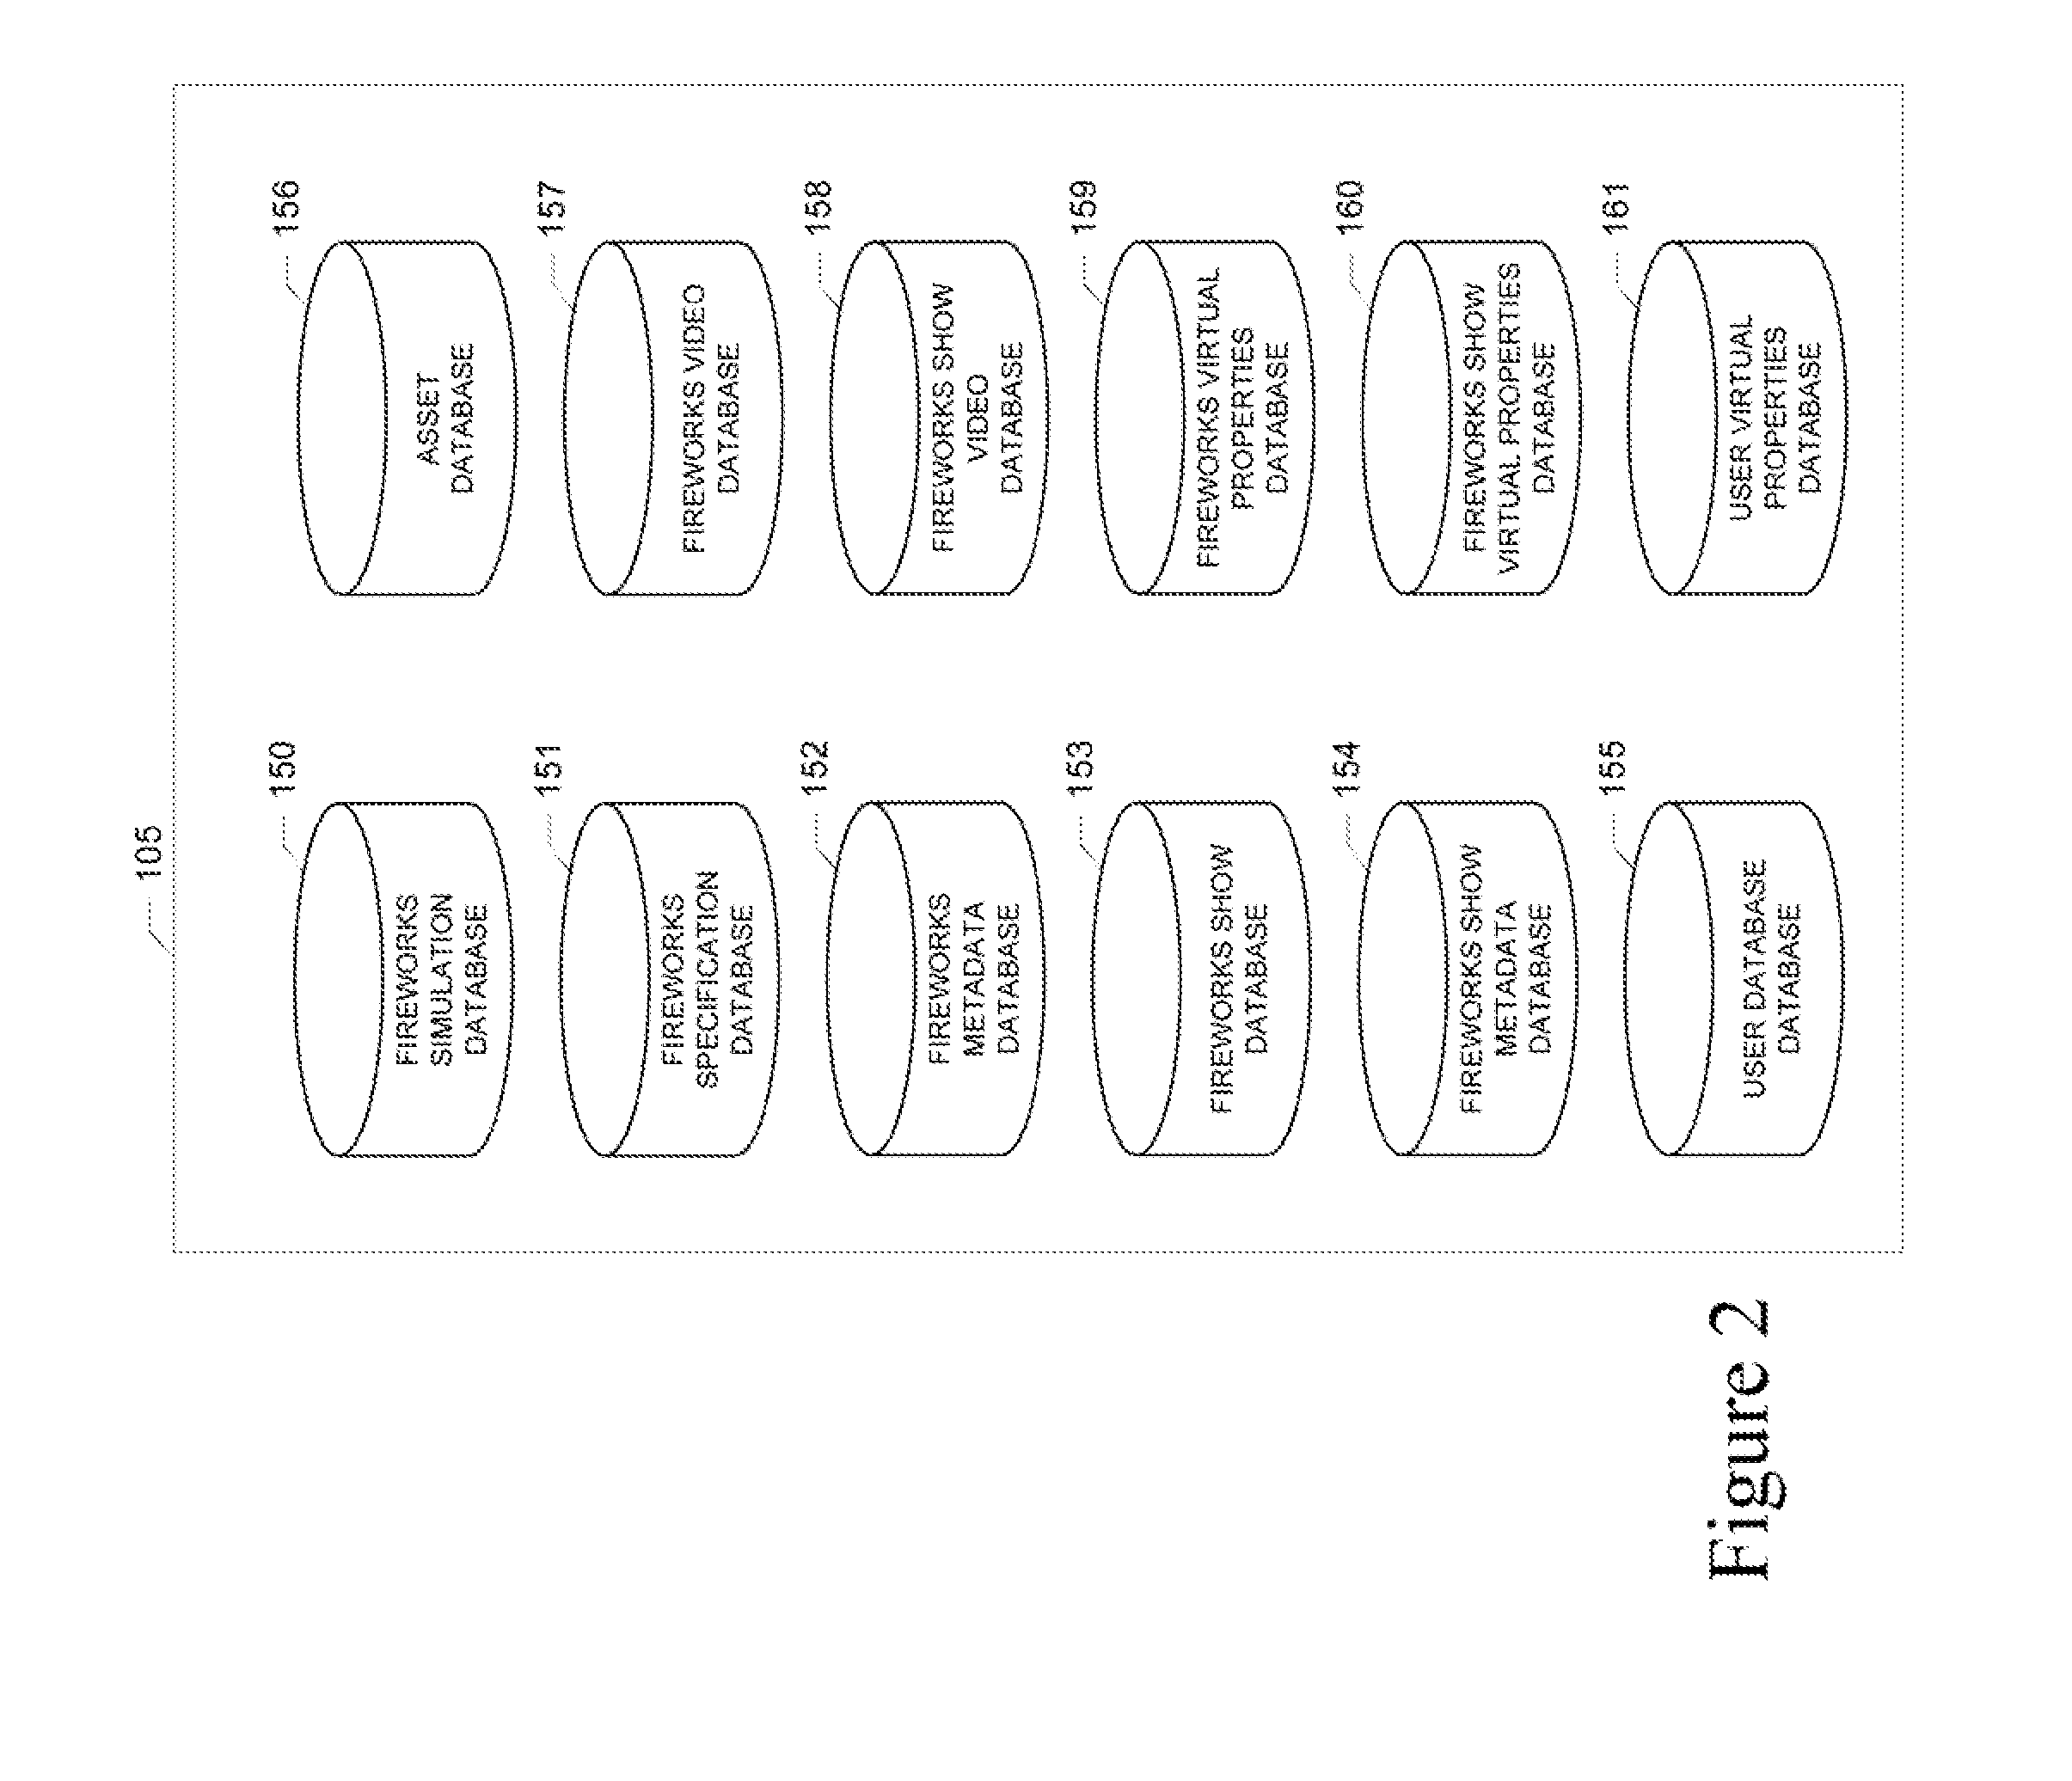 System and method for designing and simulating a fireworks show